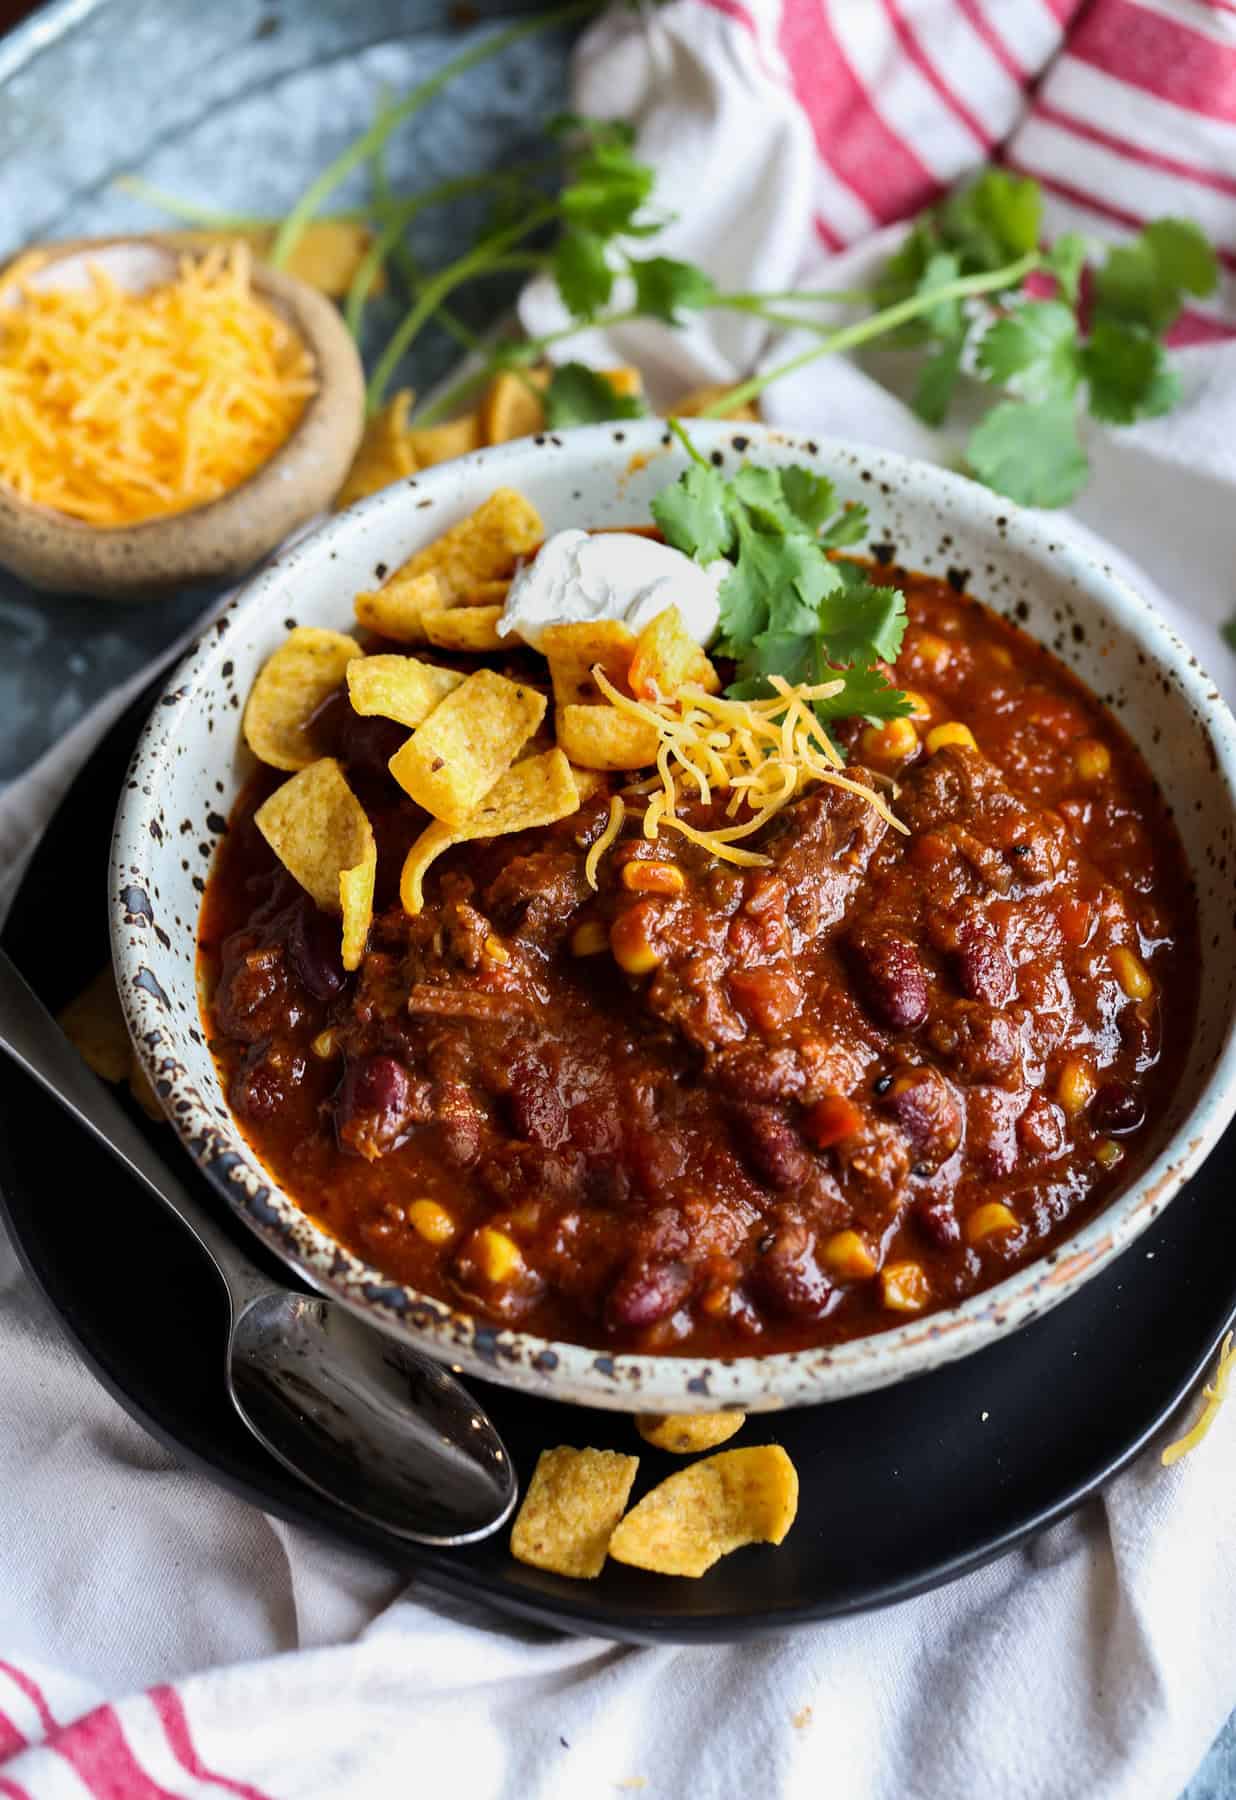 BEST EVER Best Steak Chili (easy recipe!) - The Endless Meal®